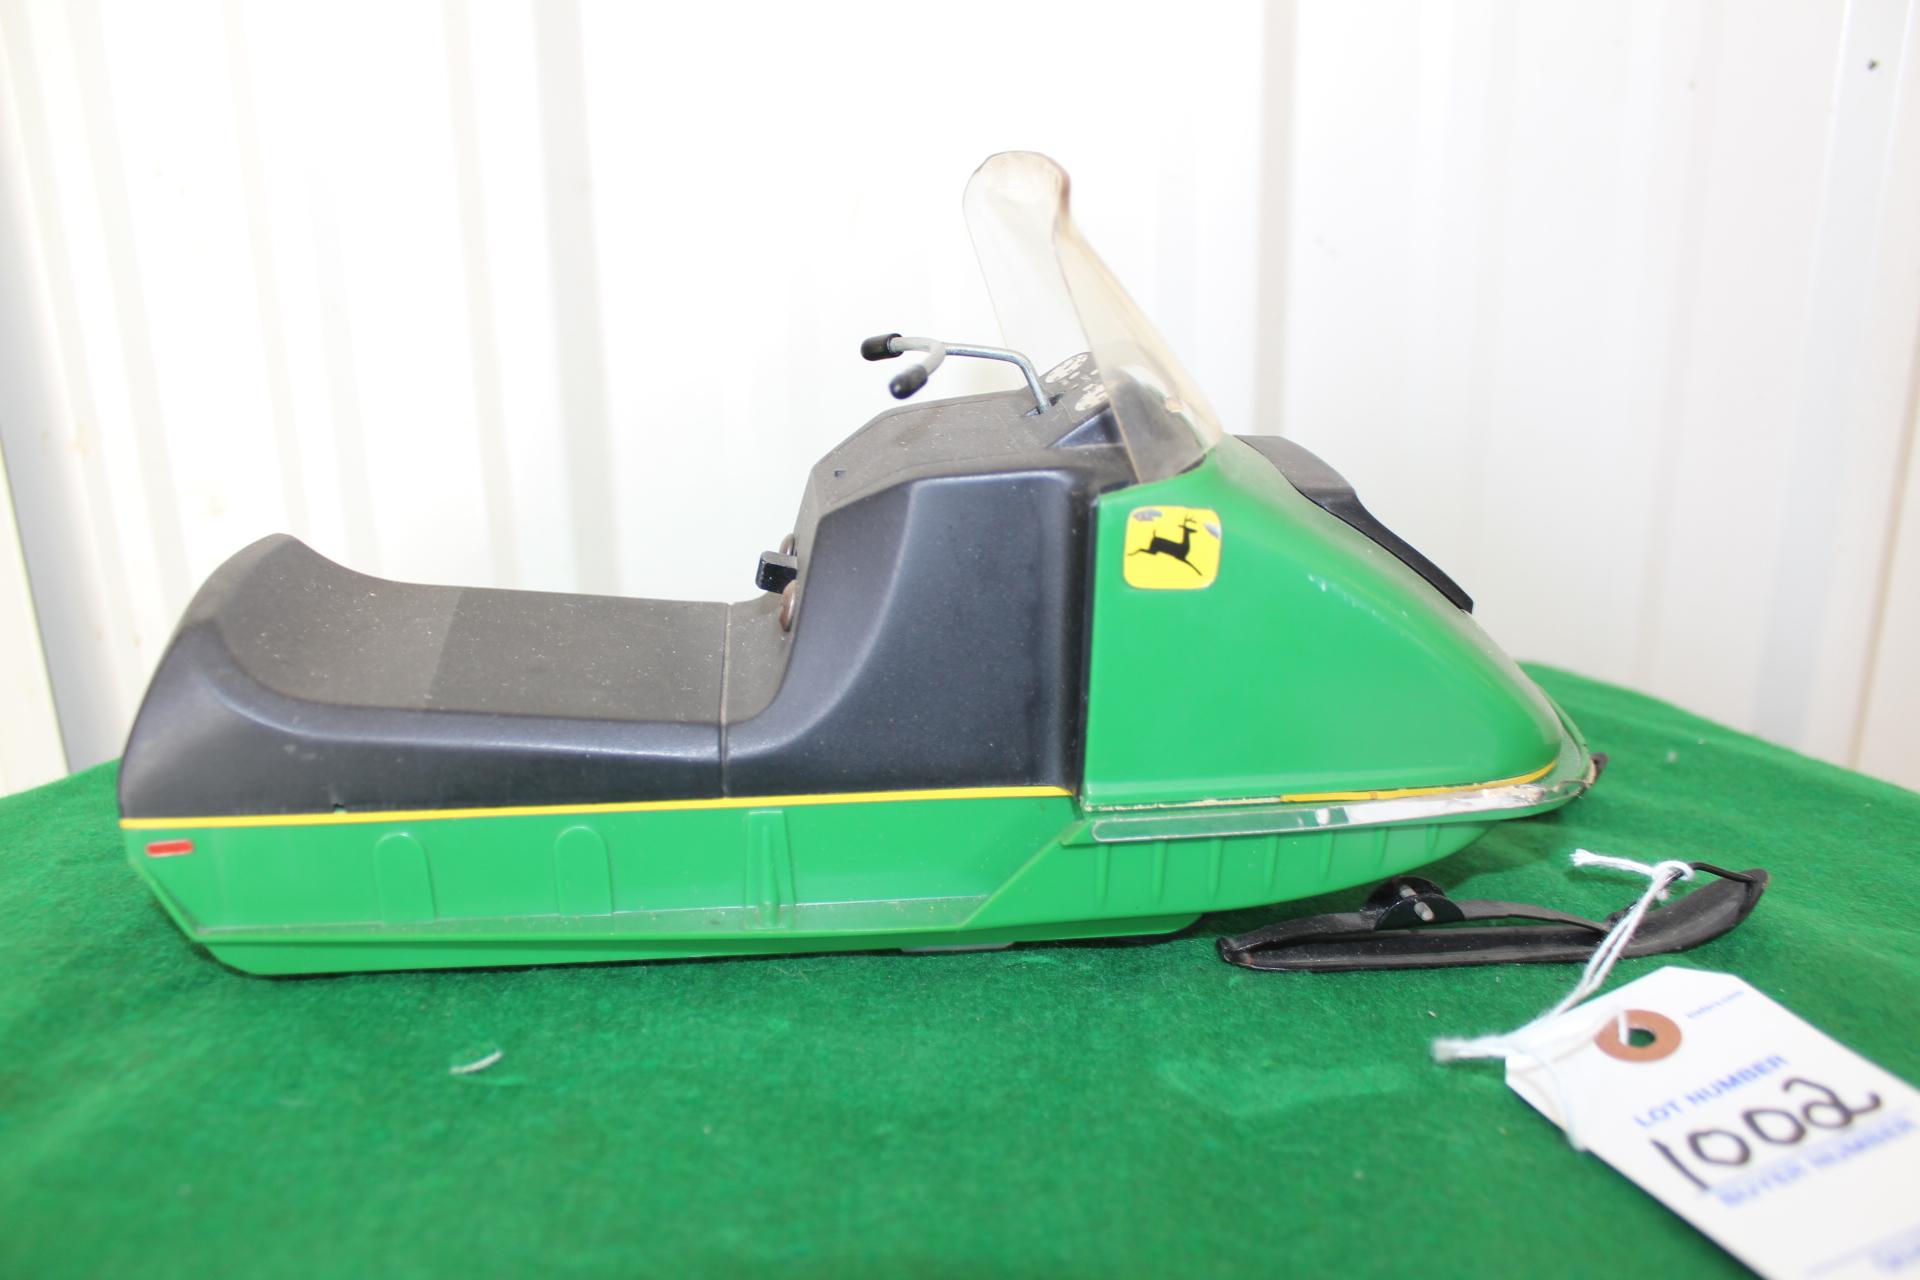 John Deere snowmobile battery operated toy, not tested, no box